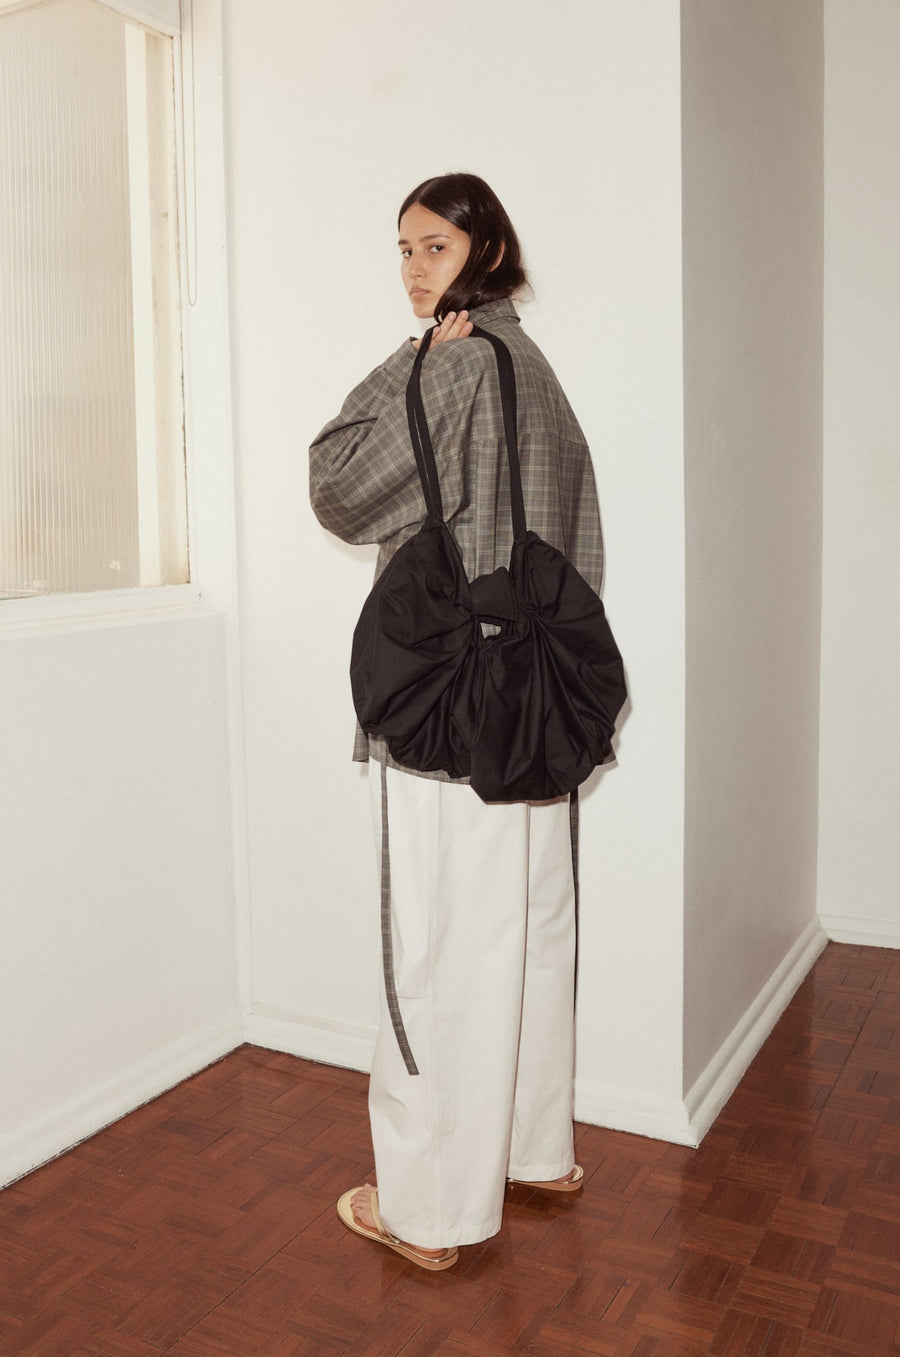 female model pictured with the Deiji Studios Bow Bag, a black organic cotton bag with subtle lustre in the shape of a ribbon bow, with long shoulder straps